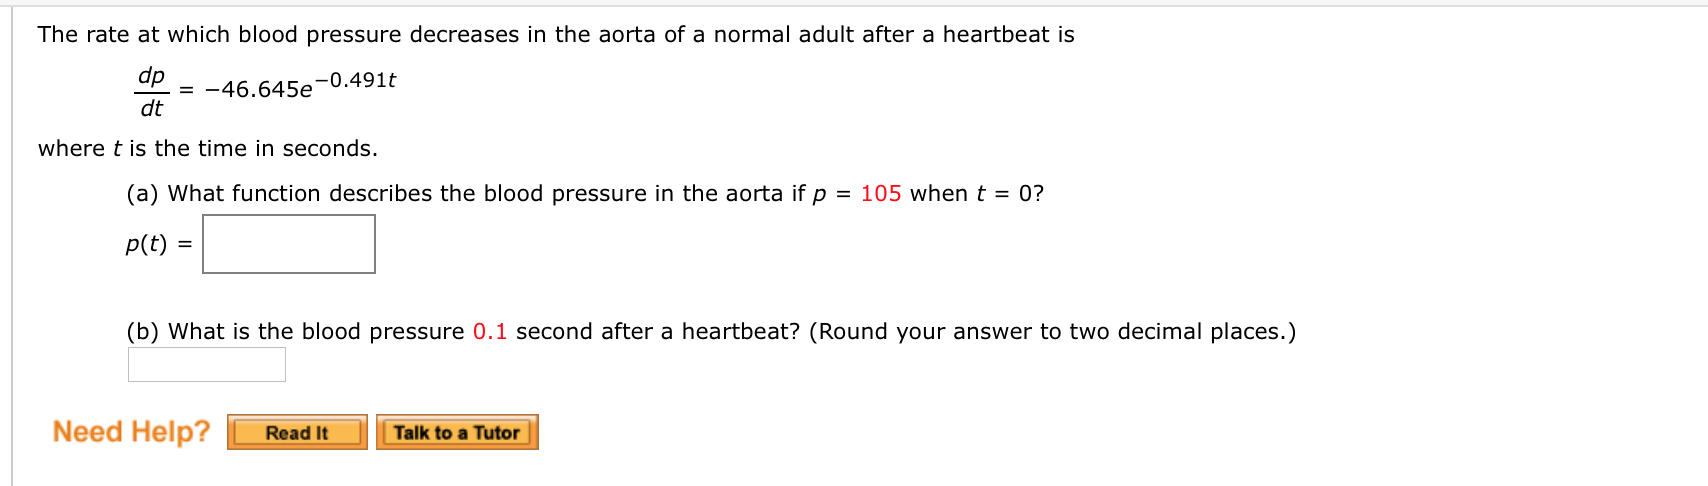 The rate at which blood pressure decreases in the aorta of a normal adult after a heartbeat is
dp
= -46.645e'
dt
-0.491t
where t is the time in seconds.
(a) What function describes the blood pressure in the aorta if p = 105 whent = 0?
p(t) =
(b) What is the blood pressure 0.1 second after a heartbeat? (Round your answer to two decimal places.)
